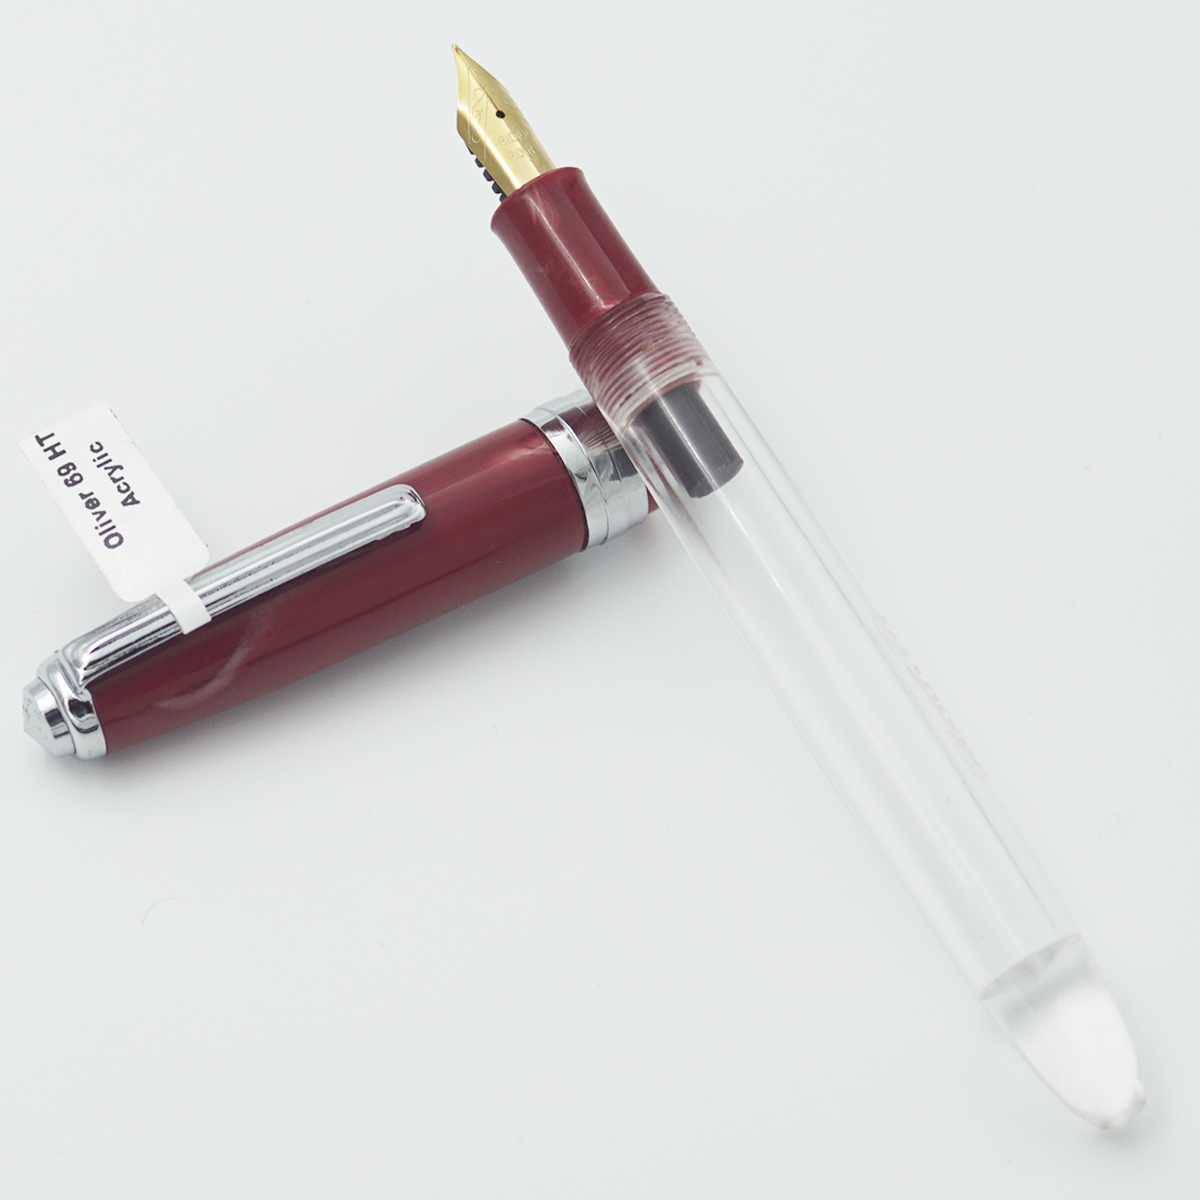 Oliver 69HT Handmade Acrylic Transparent Body Red Color Cap with Silver Trims No.8 Fine Tipped Gold Plated Nib Eyedropper Model Fountain Pen SKU 23633